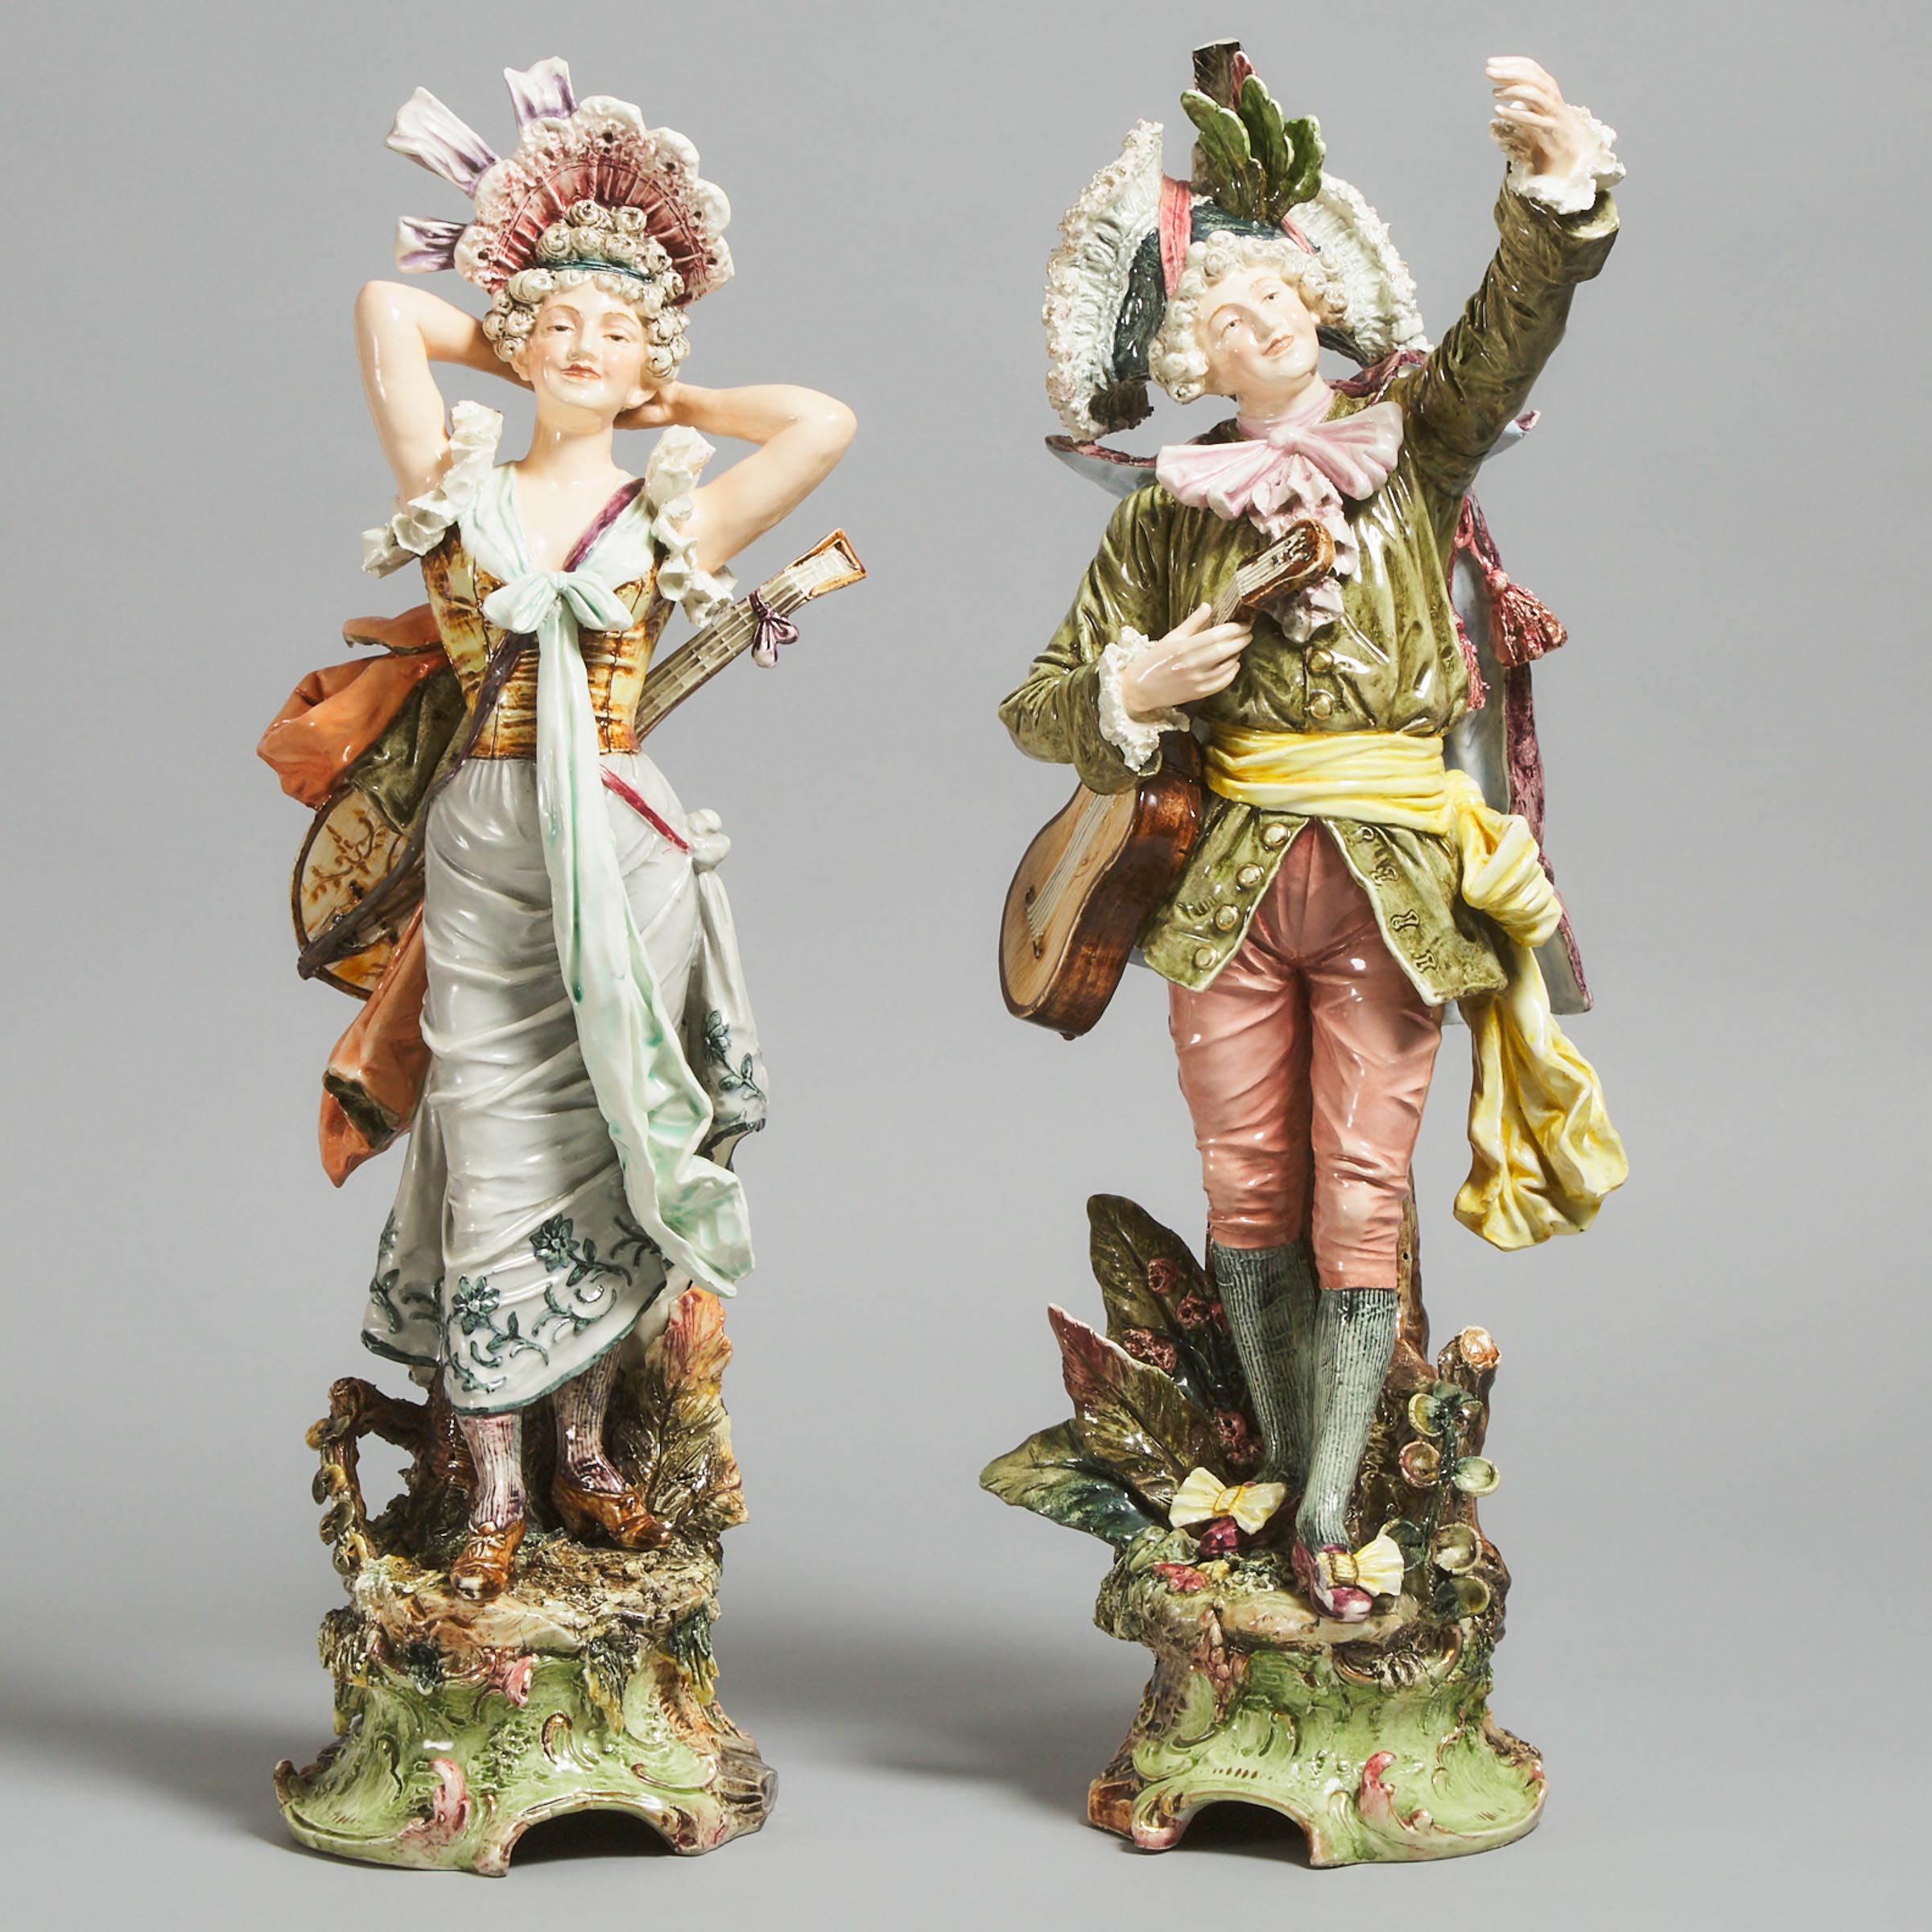 Pair of Continental Pottery Figures of Minstrels, probably Austrian, c.1900